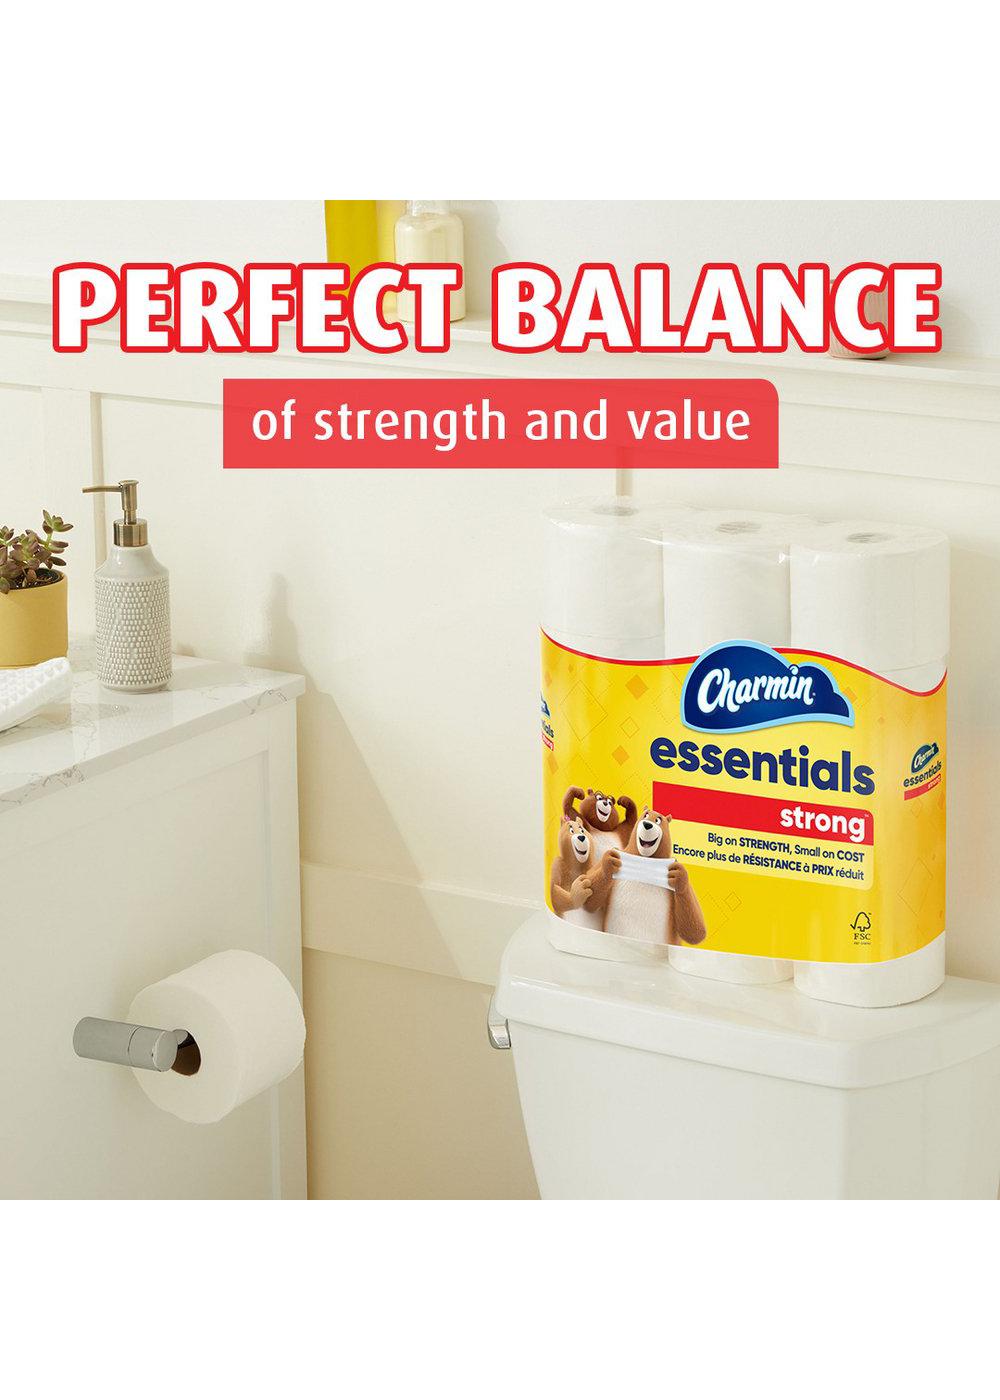 Charmin Essentials Strong Toilet Paper; image 3 of 6